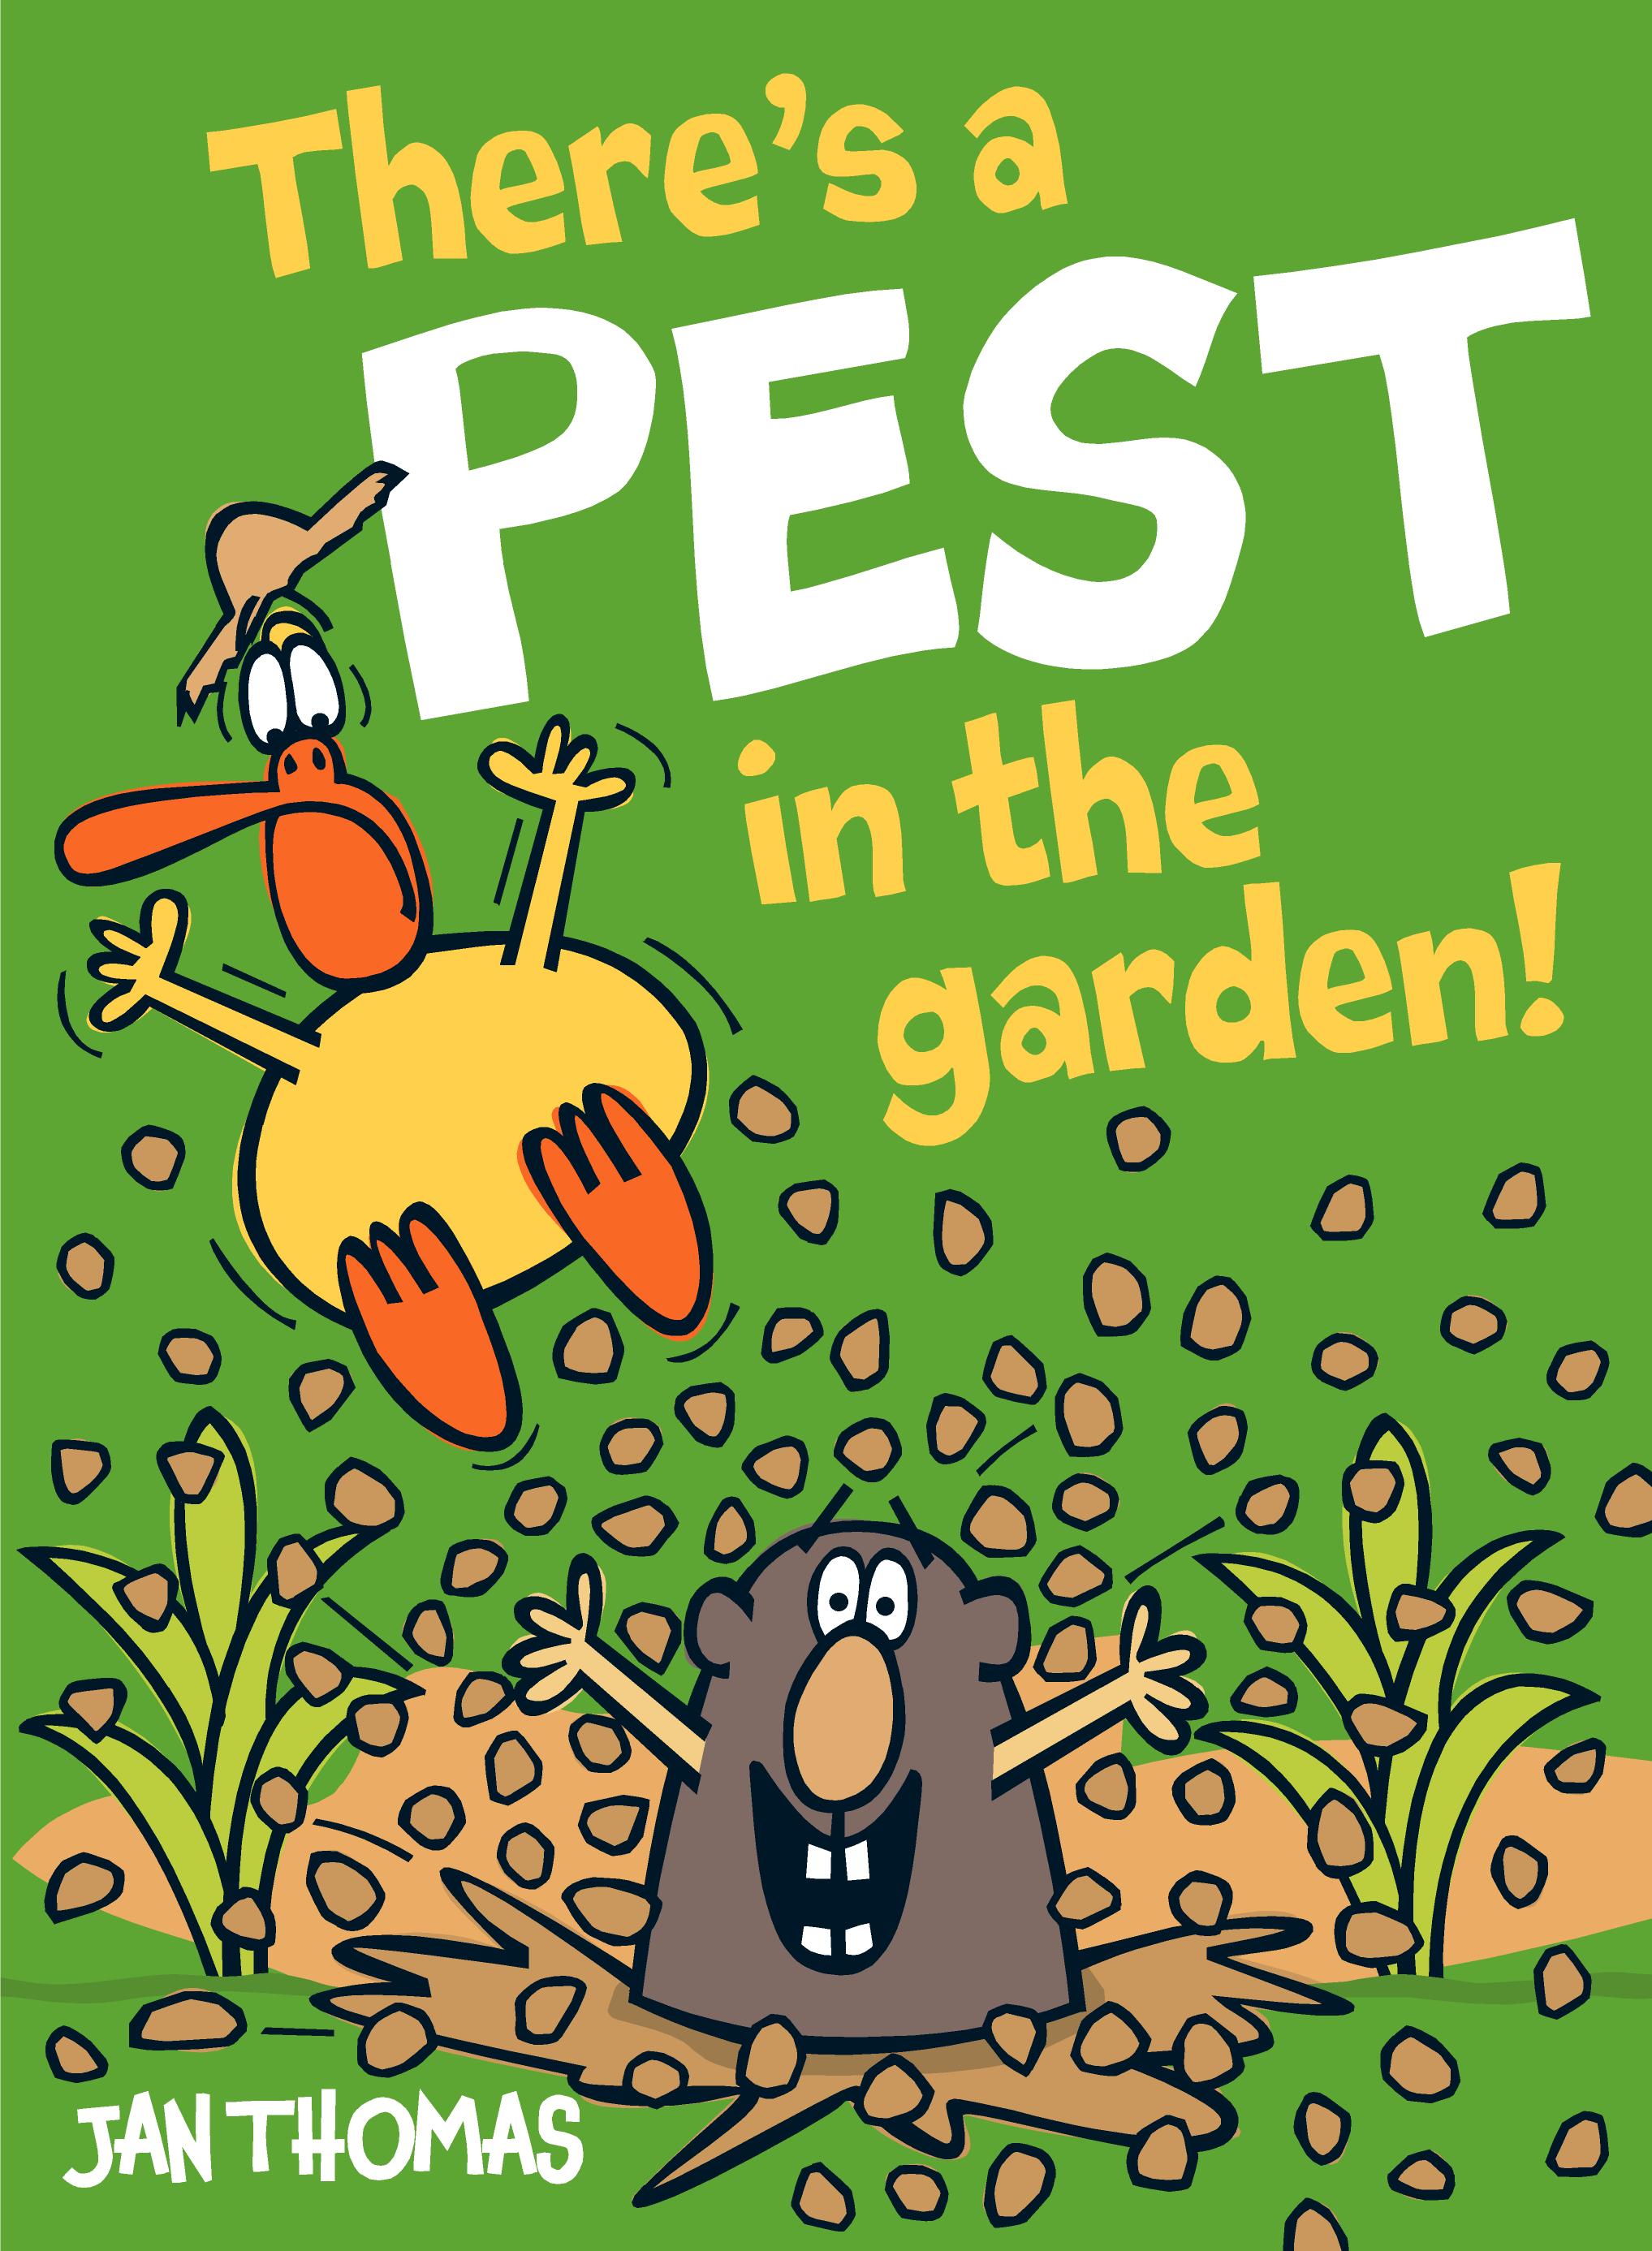 There is a pest in the garden!